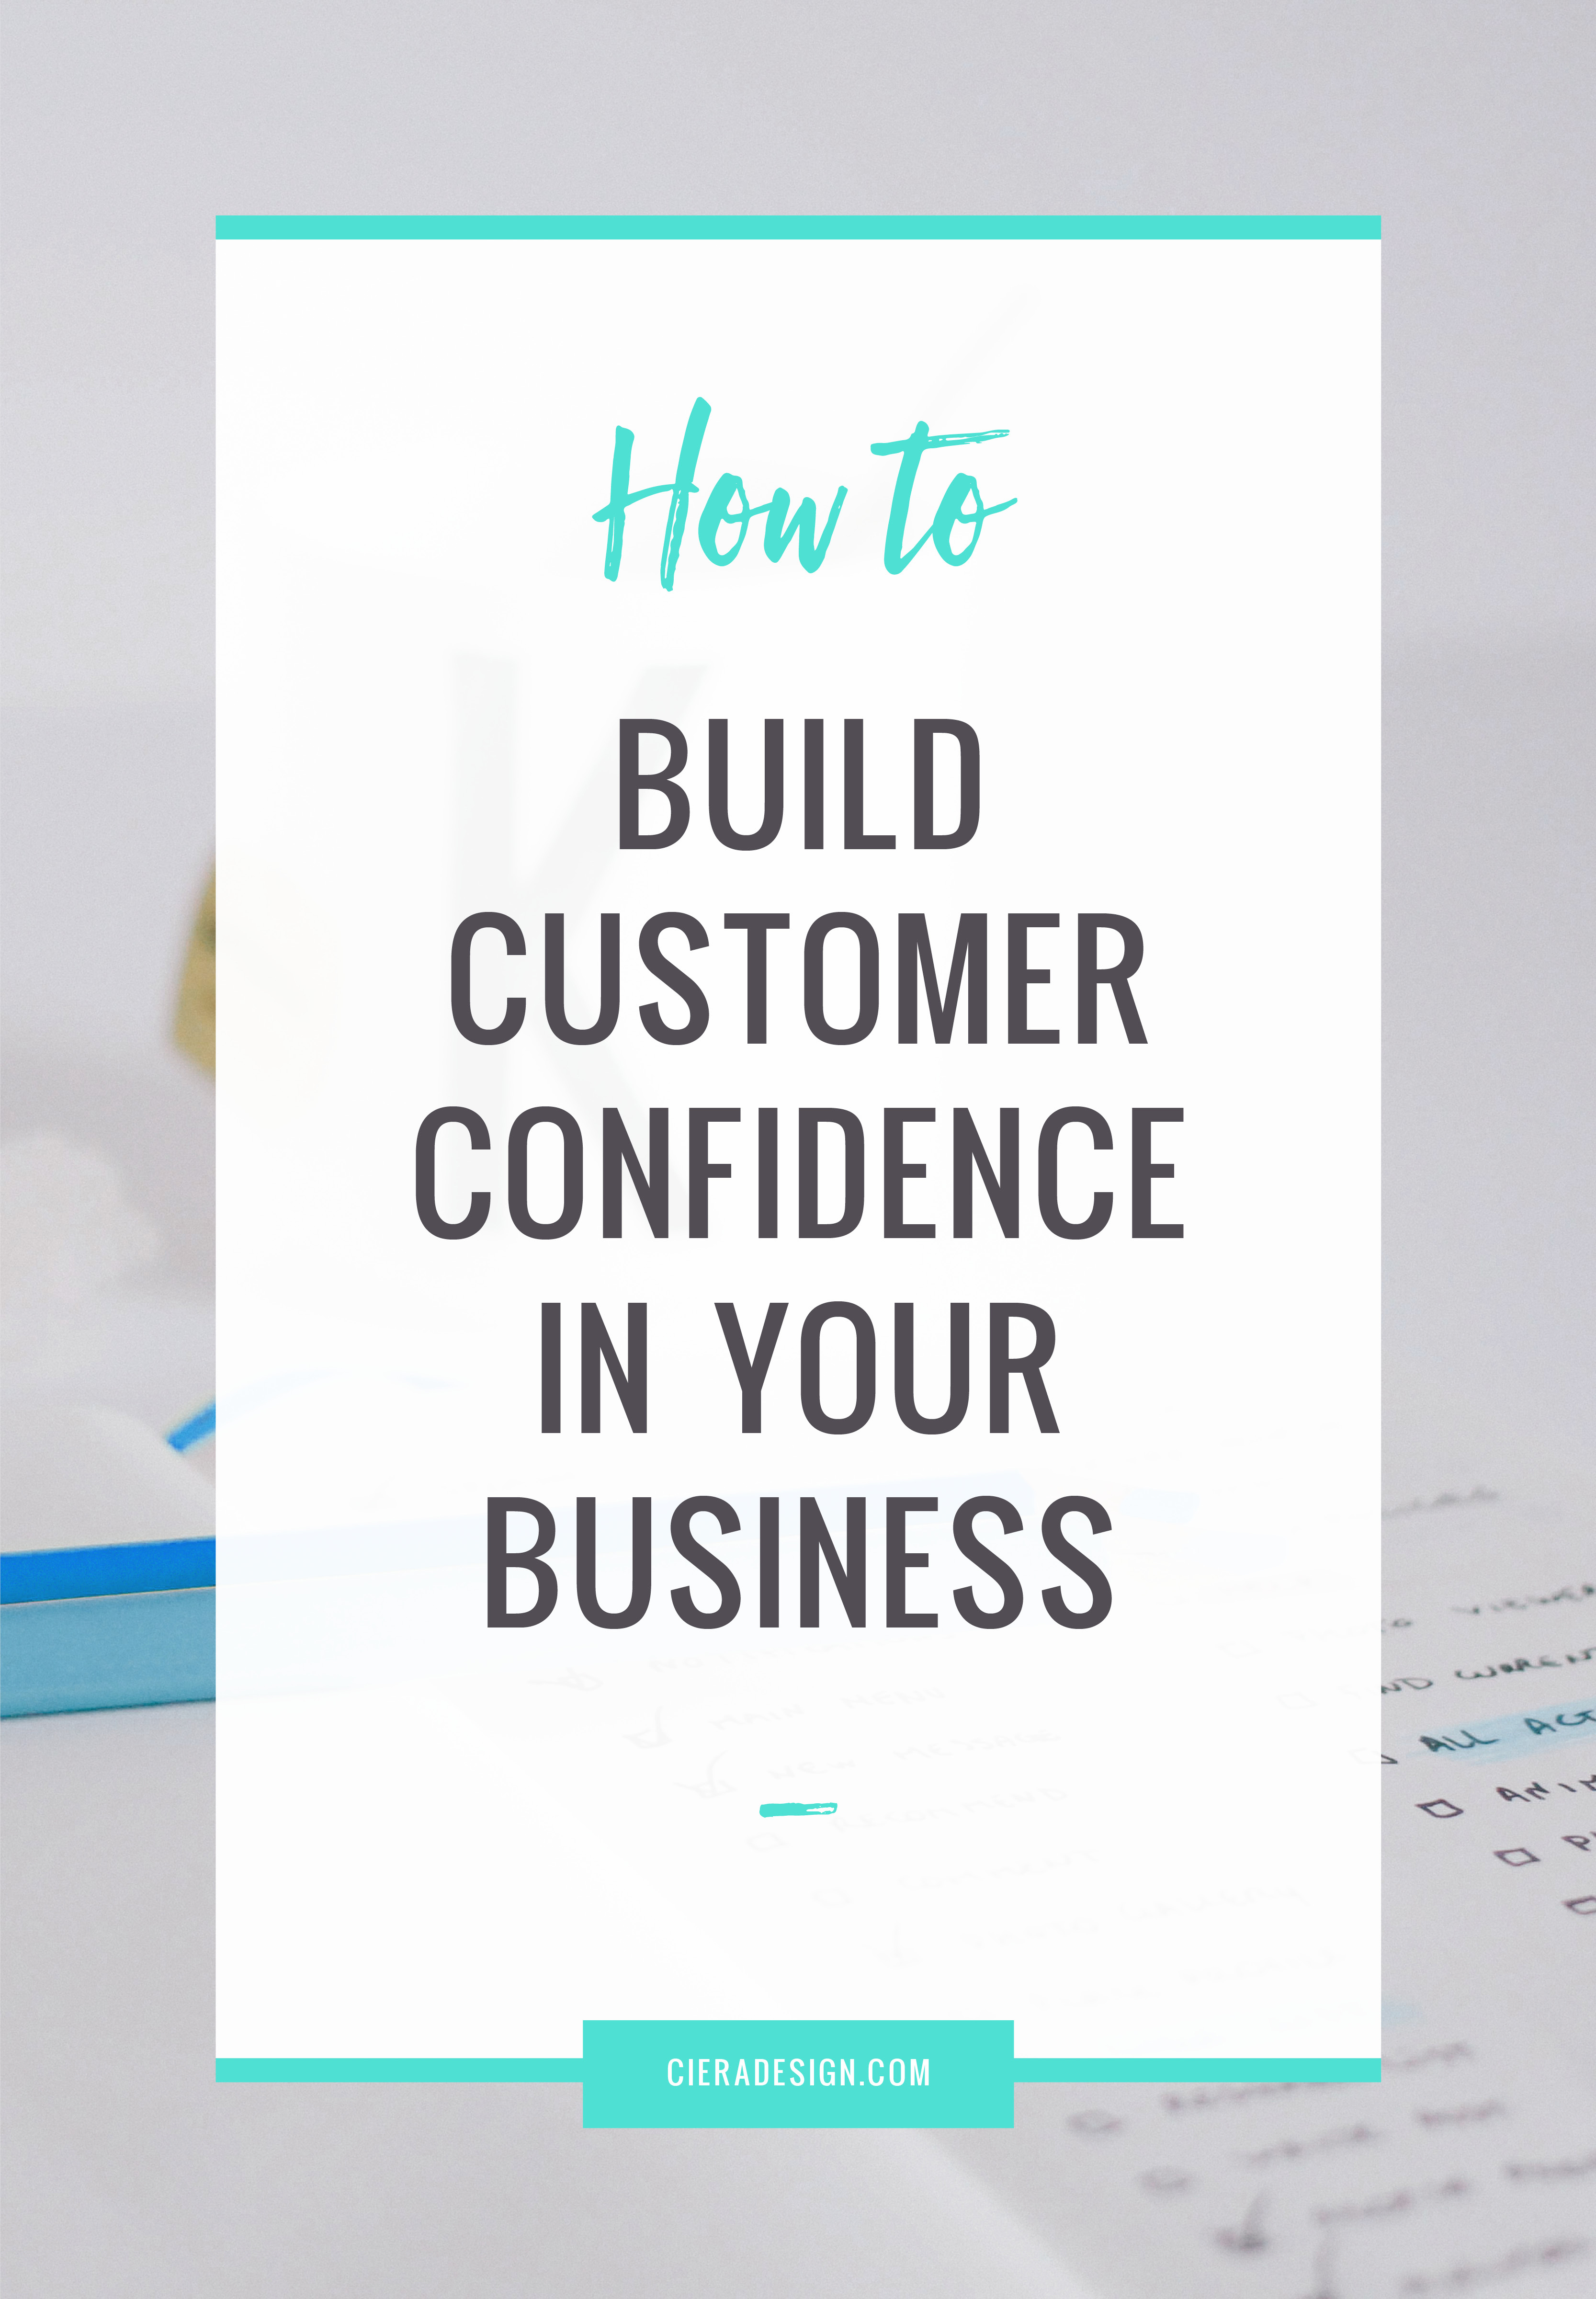 Quick tips to build customer confidence in your business now.